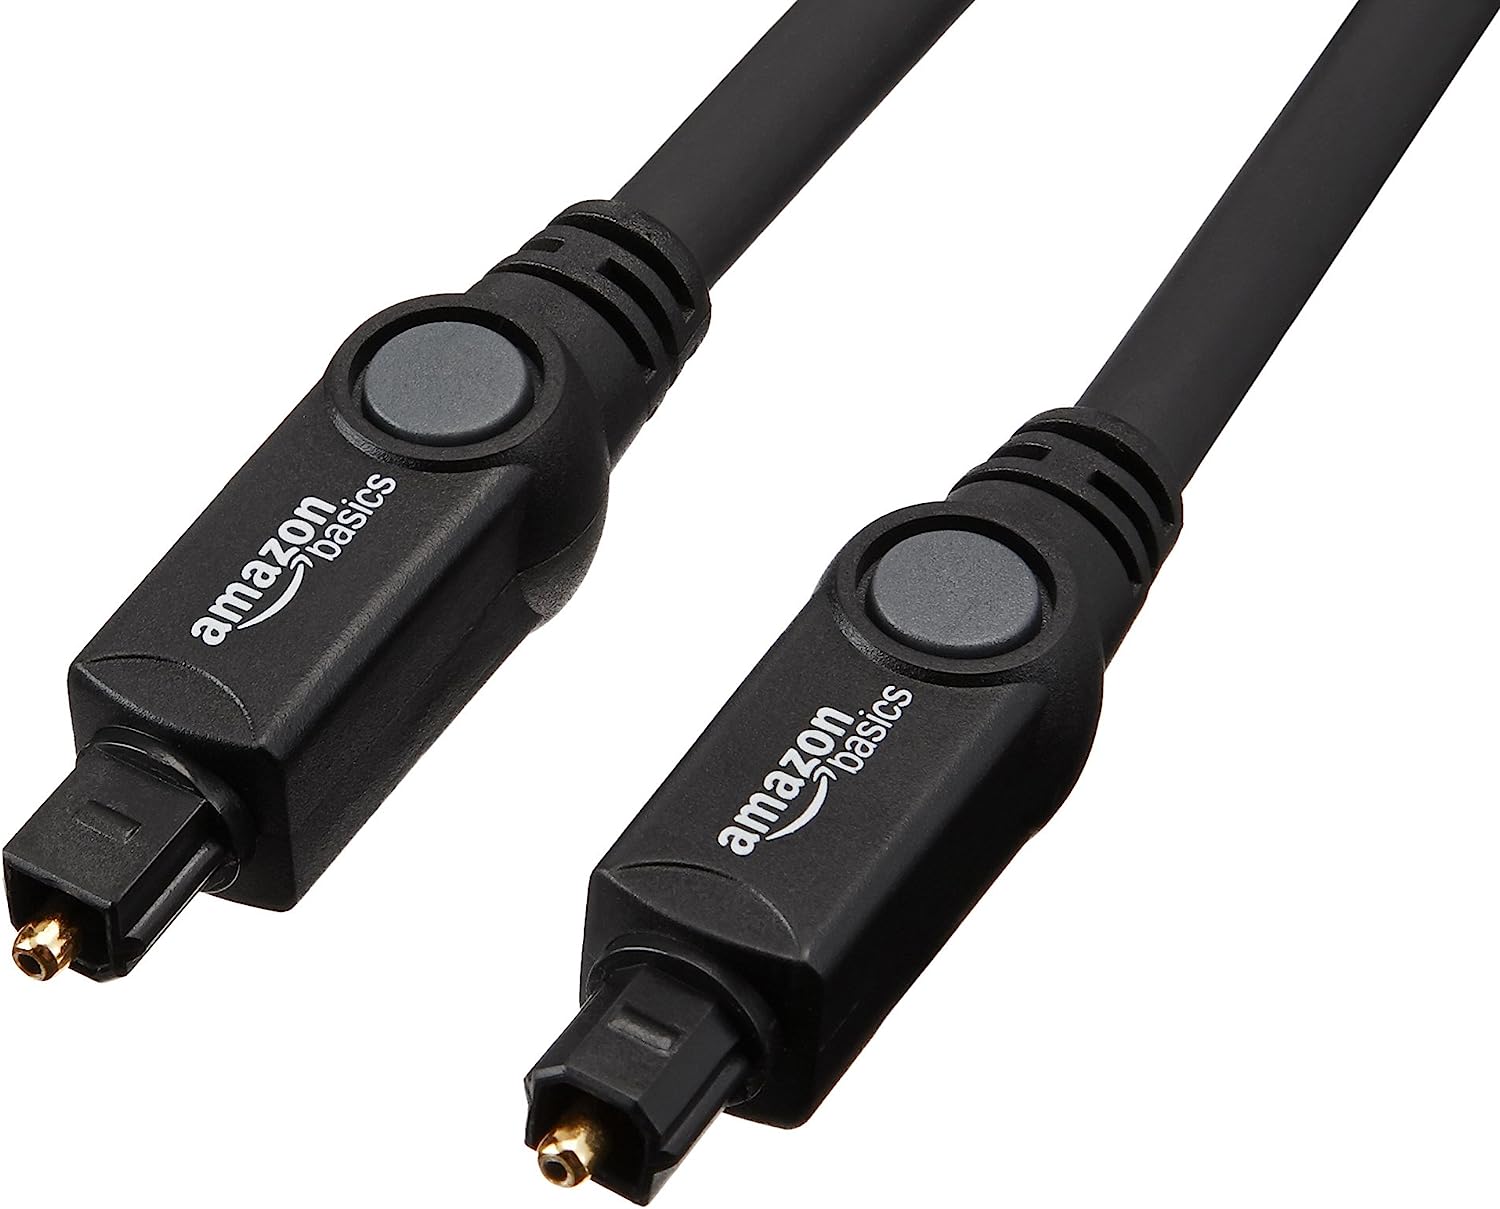 toslink cable detailed review